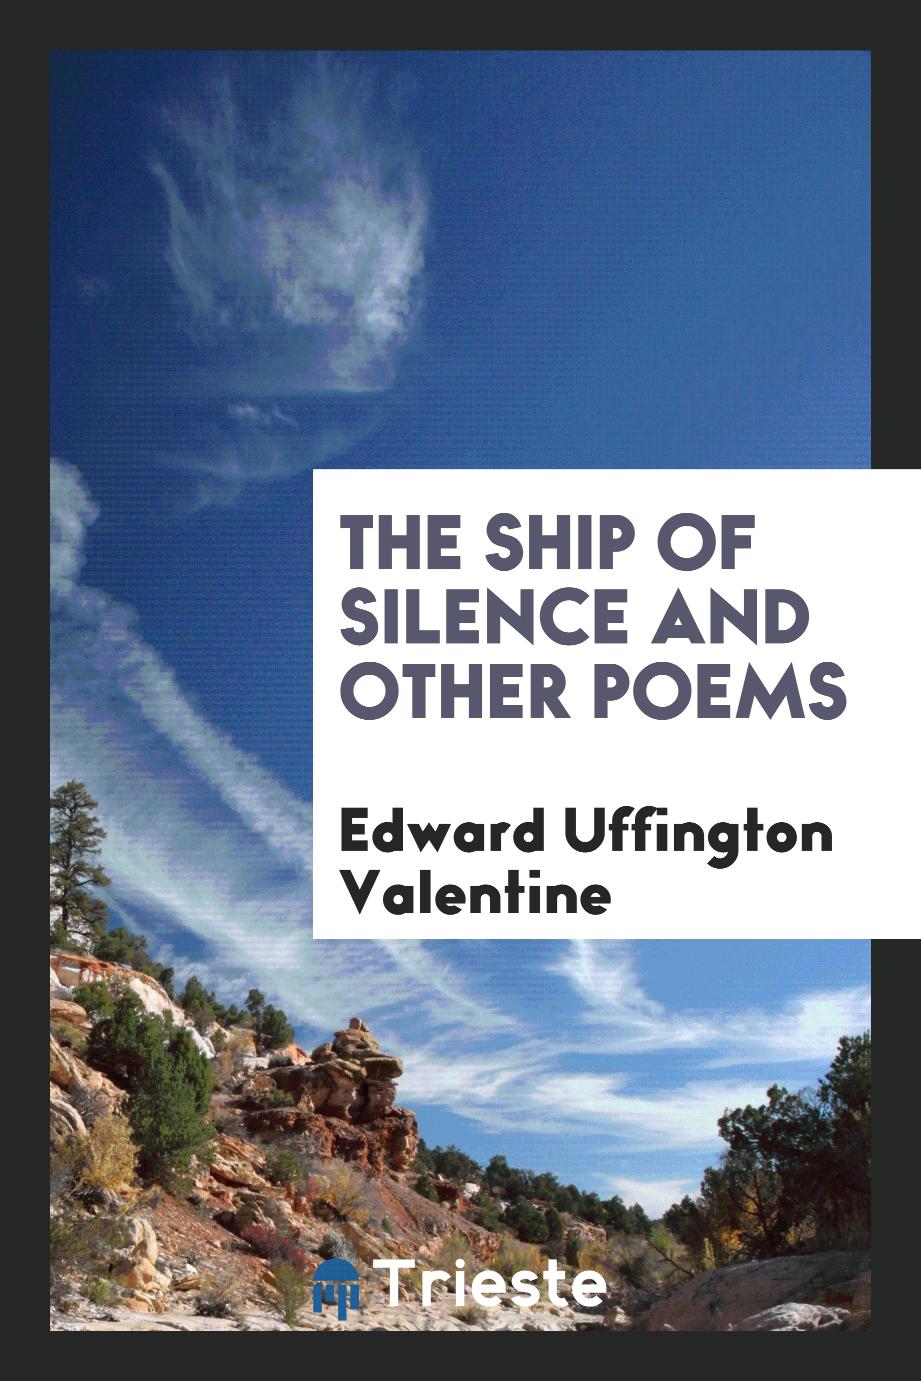 The Ship of Silence and Other Poems